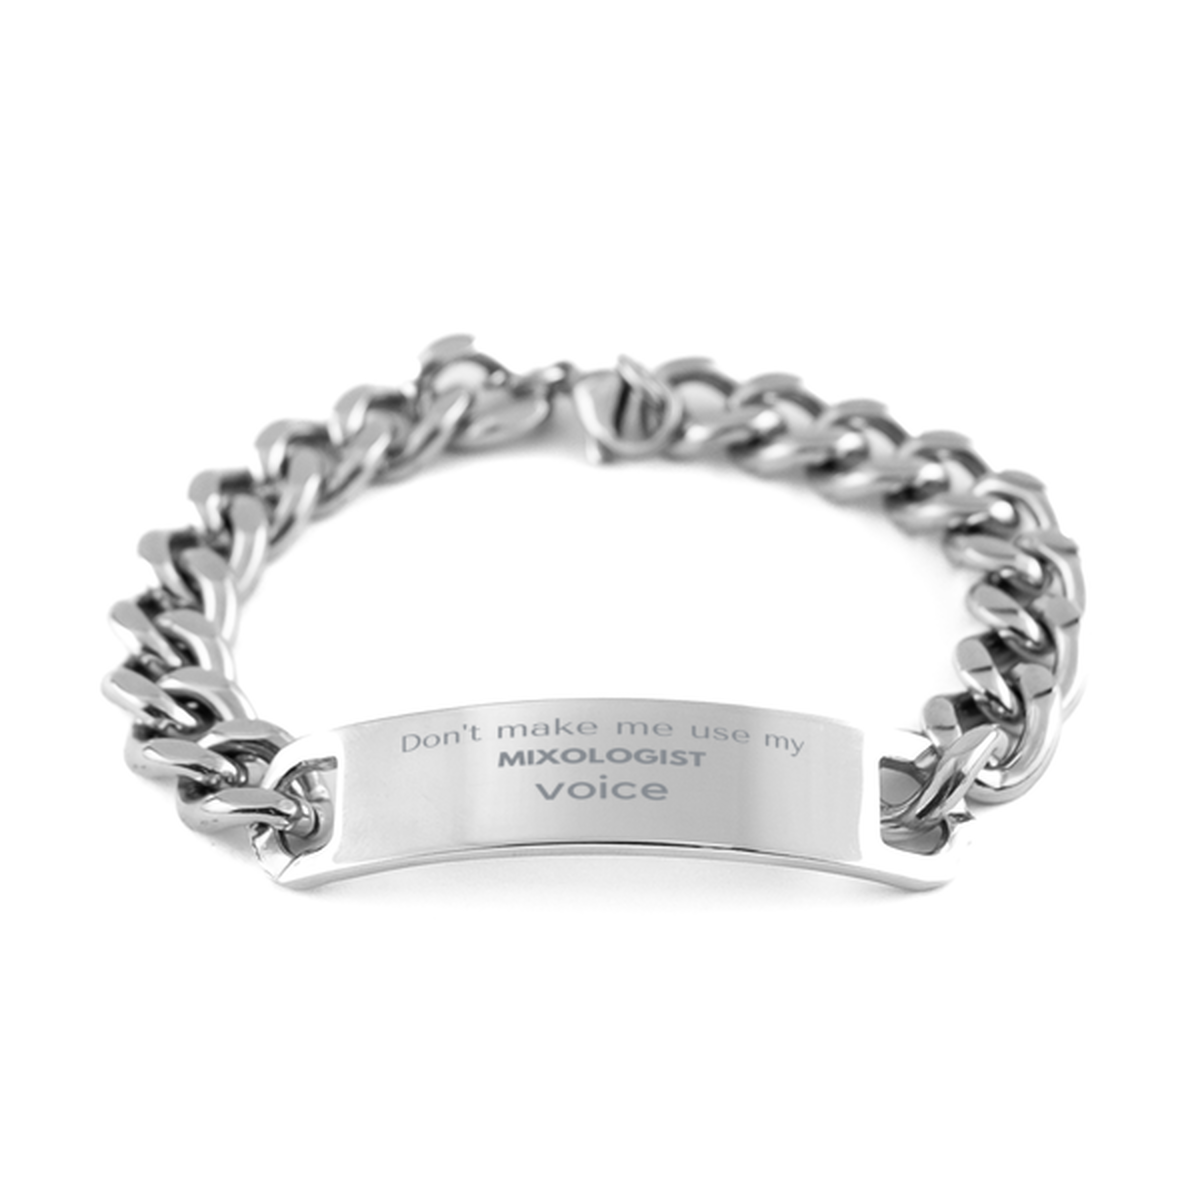 Don't make me use my Mixologist voice, Sarcasm Mixologist Gifts, Christmas Mixologist Cuban Chain Stainless Steel Bracelet Birthday Unique Gifts For Mixologist Coworkers, Men, Women, Colleague, Friends